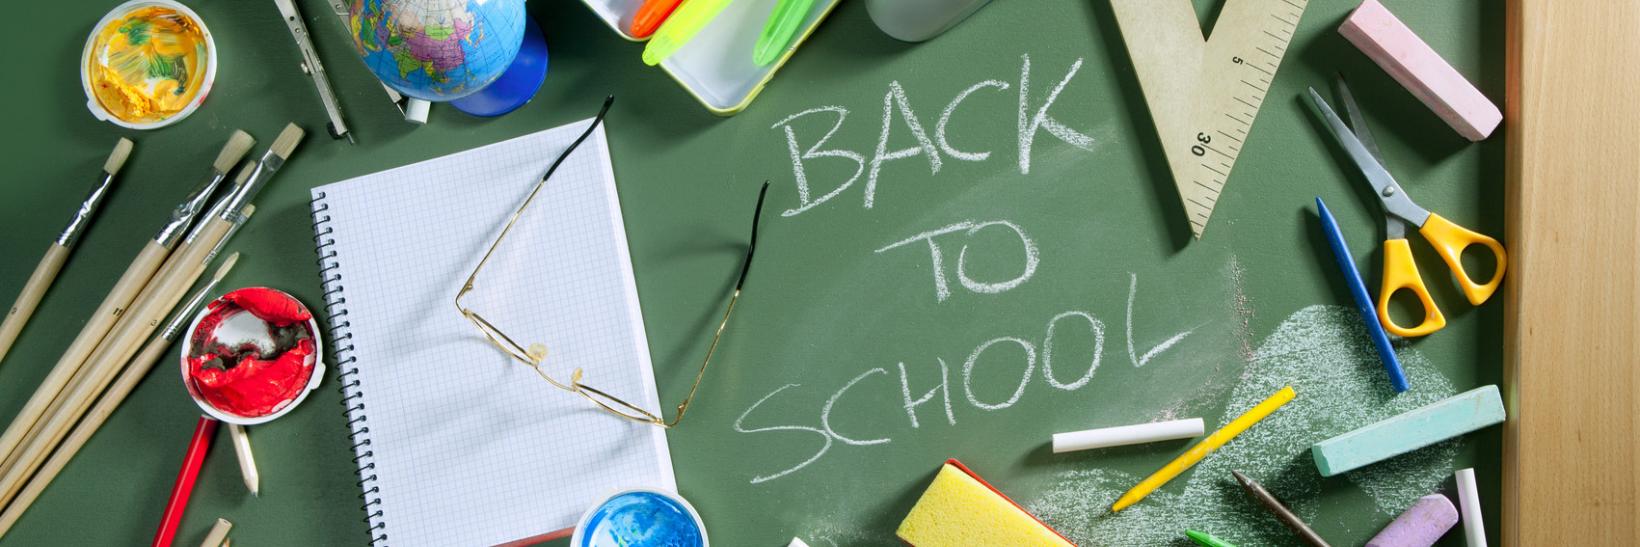 Back to school: know before you go.